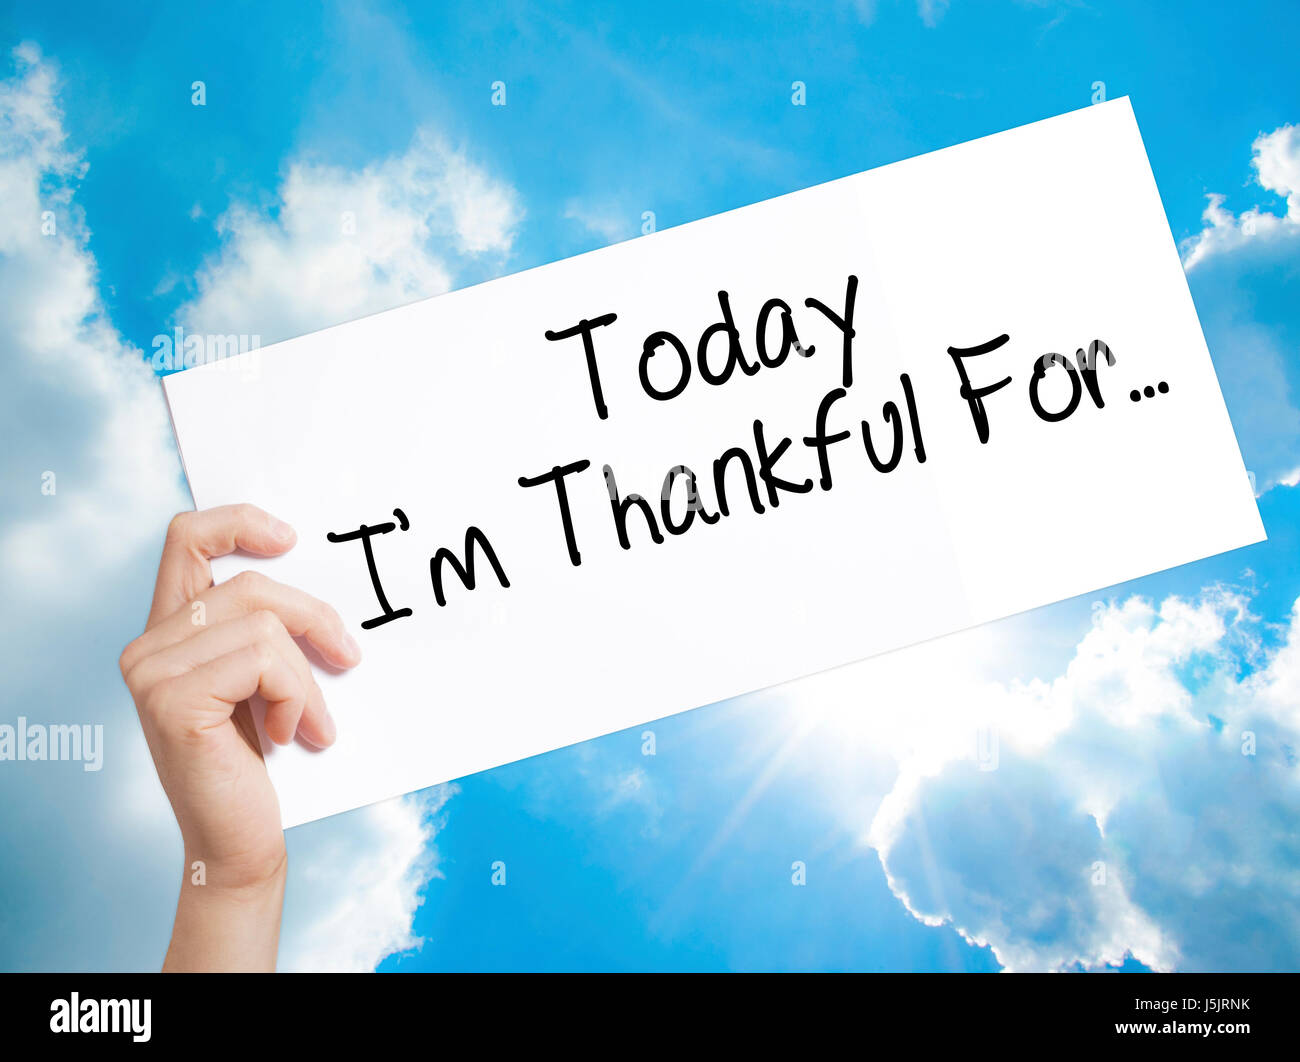 Today I'm Thankful For..Sign on white paper. Man Hand Holding Paper with text. Isolated on sky background. Life, Business concept. Stock Photo Stock Photo